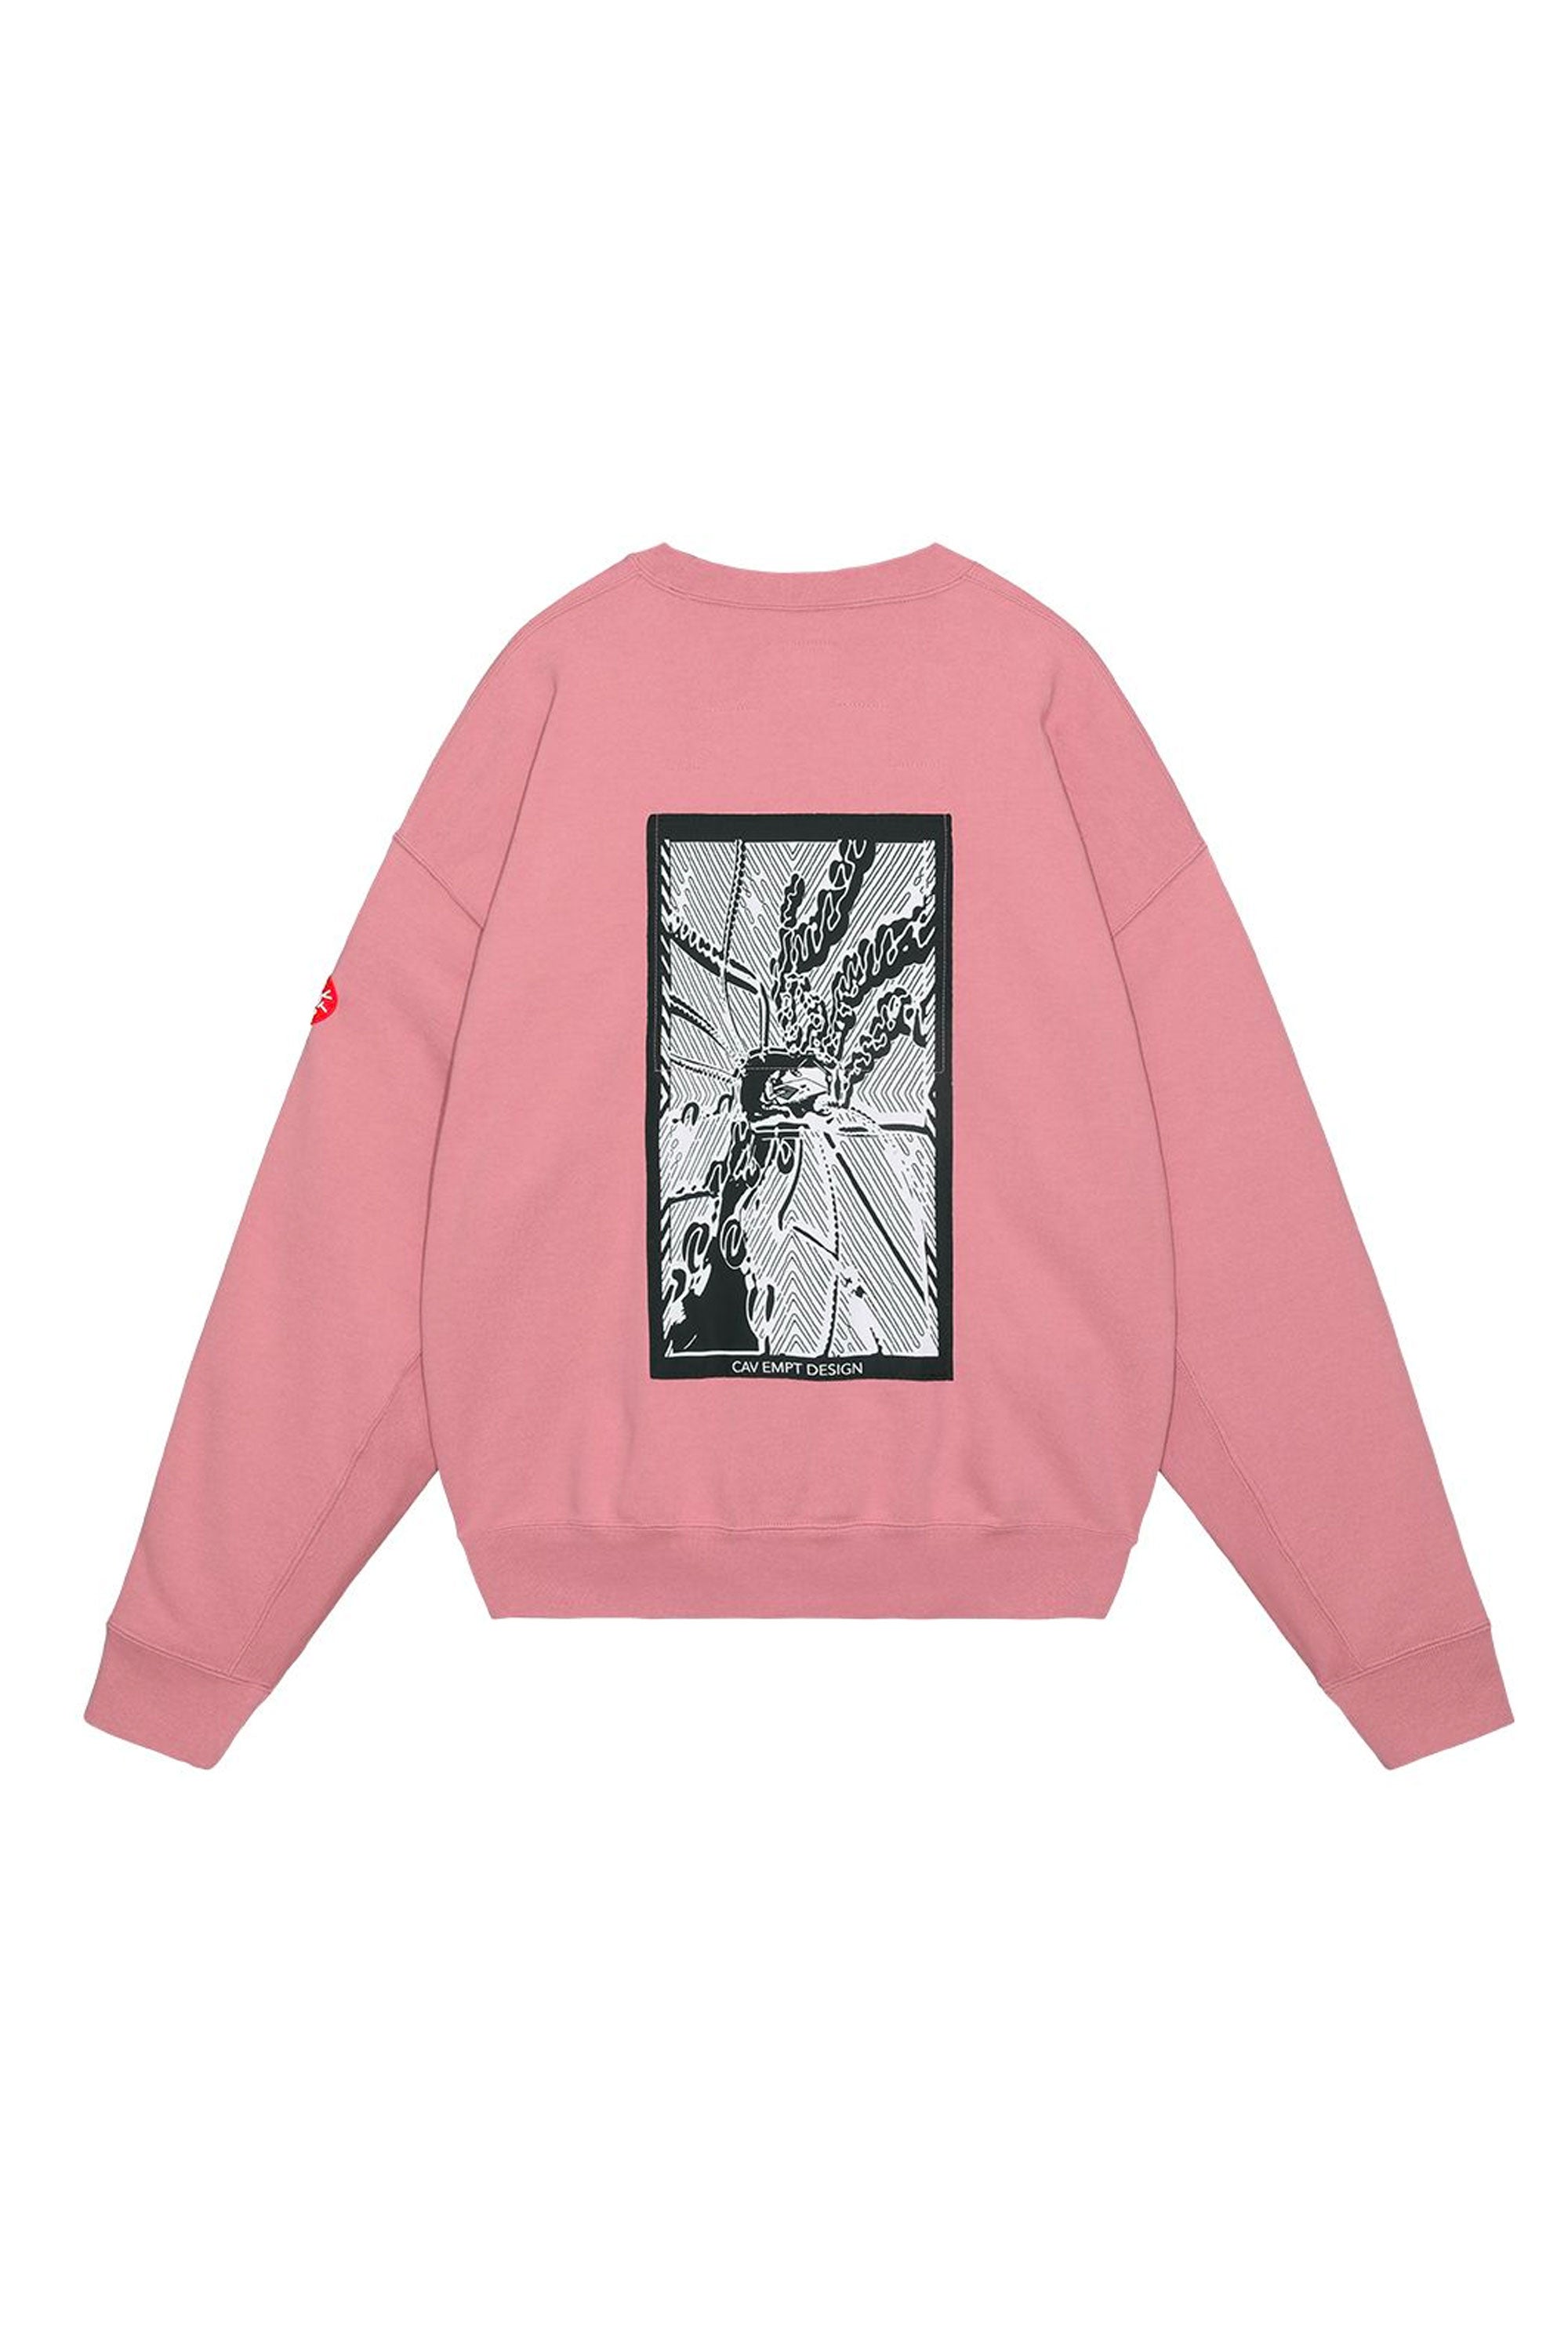 The CAV EMPT - MD DELIRIUM CREW NECK  available online with global shipping, and in PAM Stores Melbourne and Sydney.